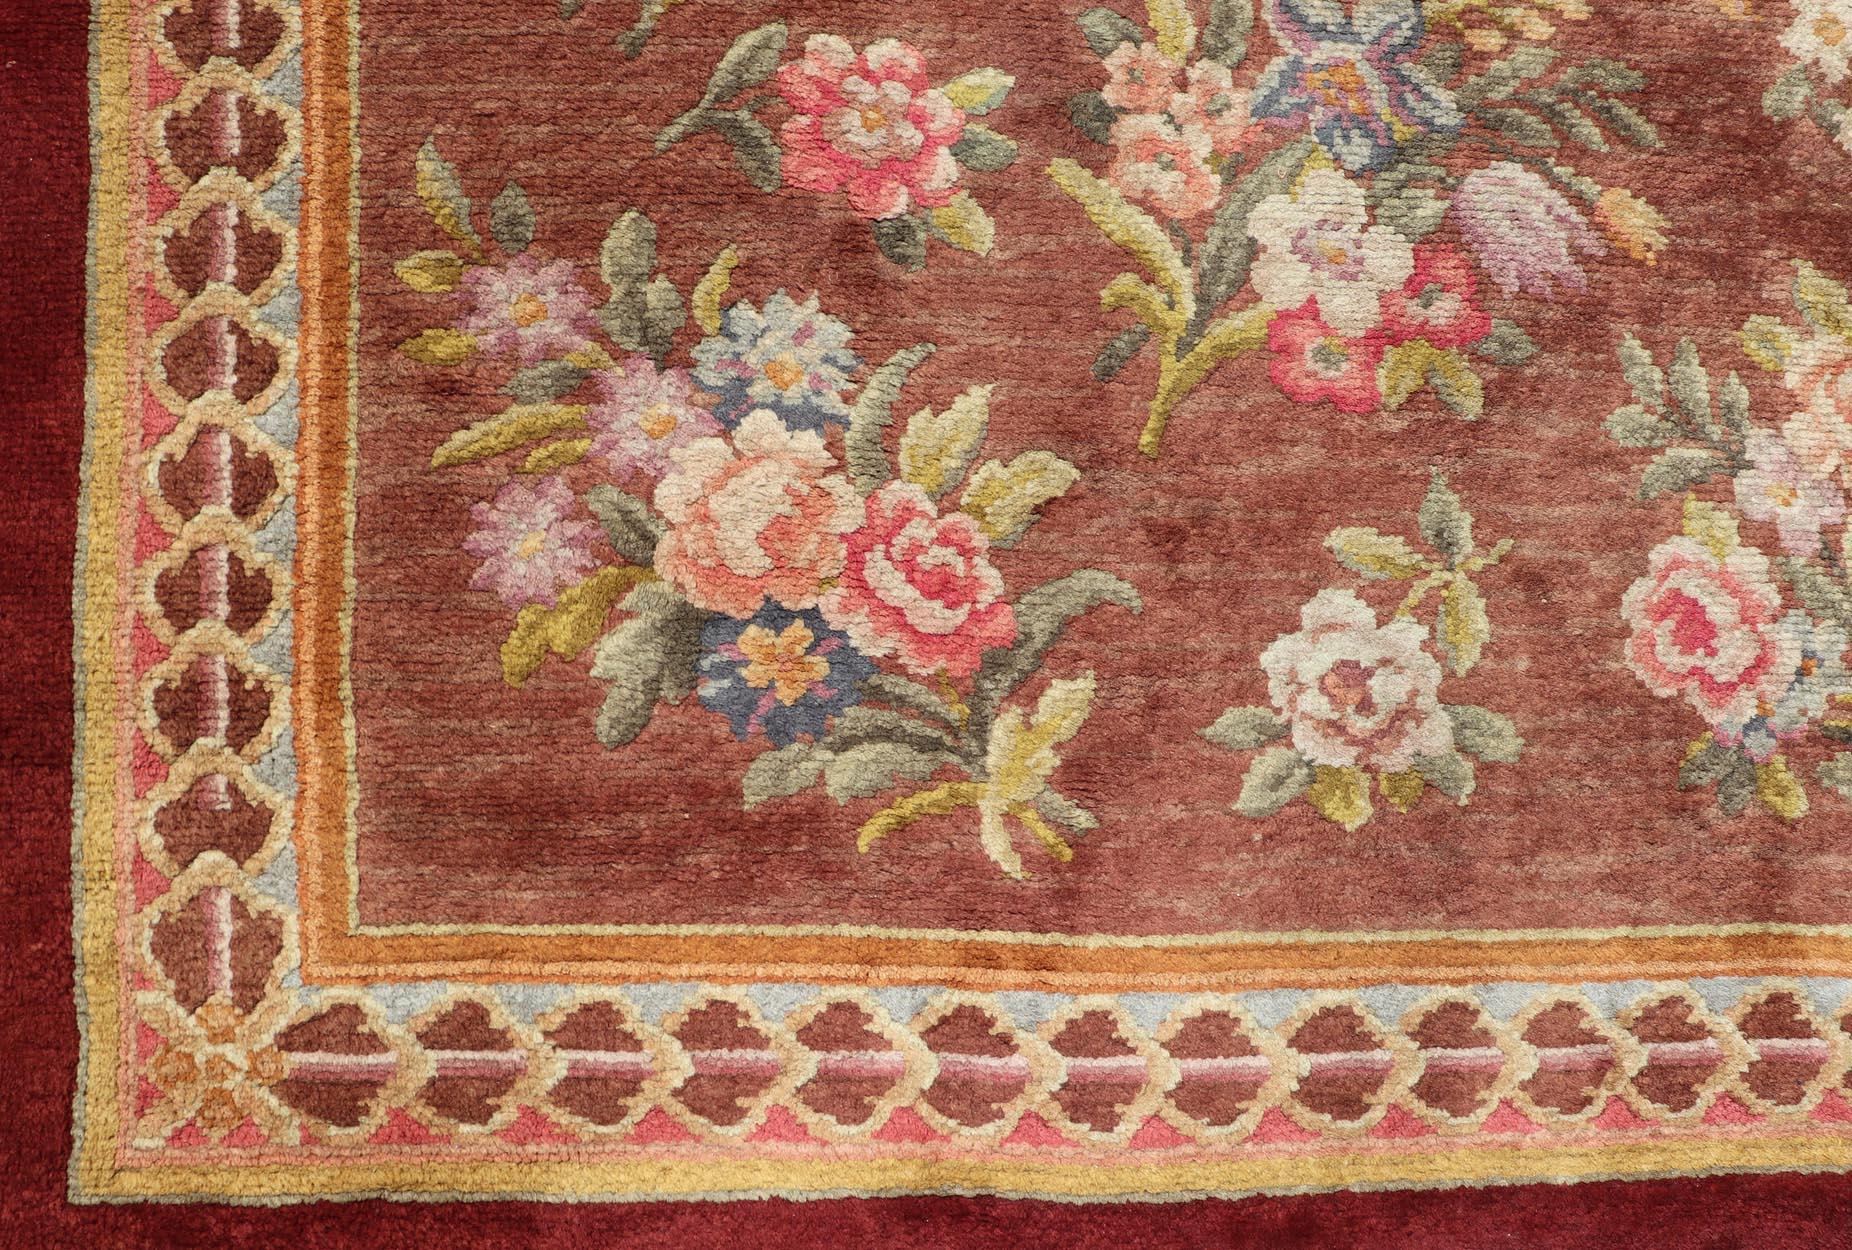 This European Savonnerie Rug has been hand-knotted in late 19th century in France. Owned by Coca-Cola magnate Robert W. Woodruff between 1948 until the late 1980s at his Windcrofte estate, the rug features an all-over floral design. The entirety of